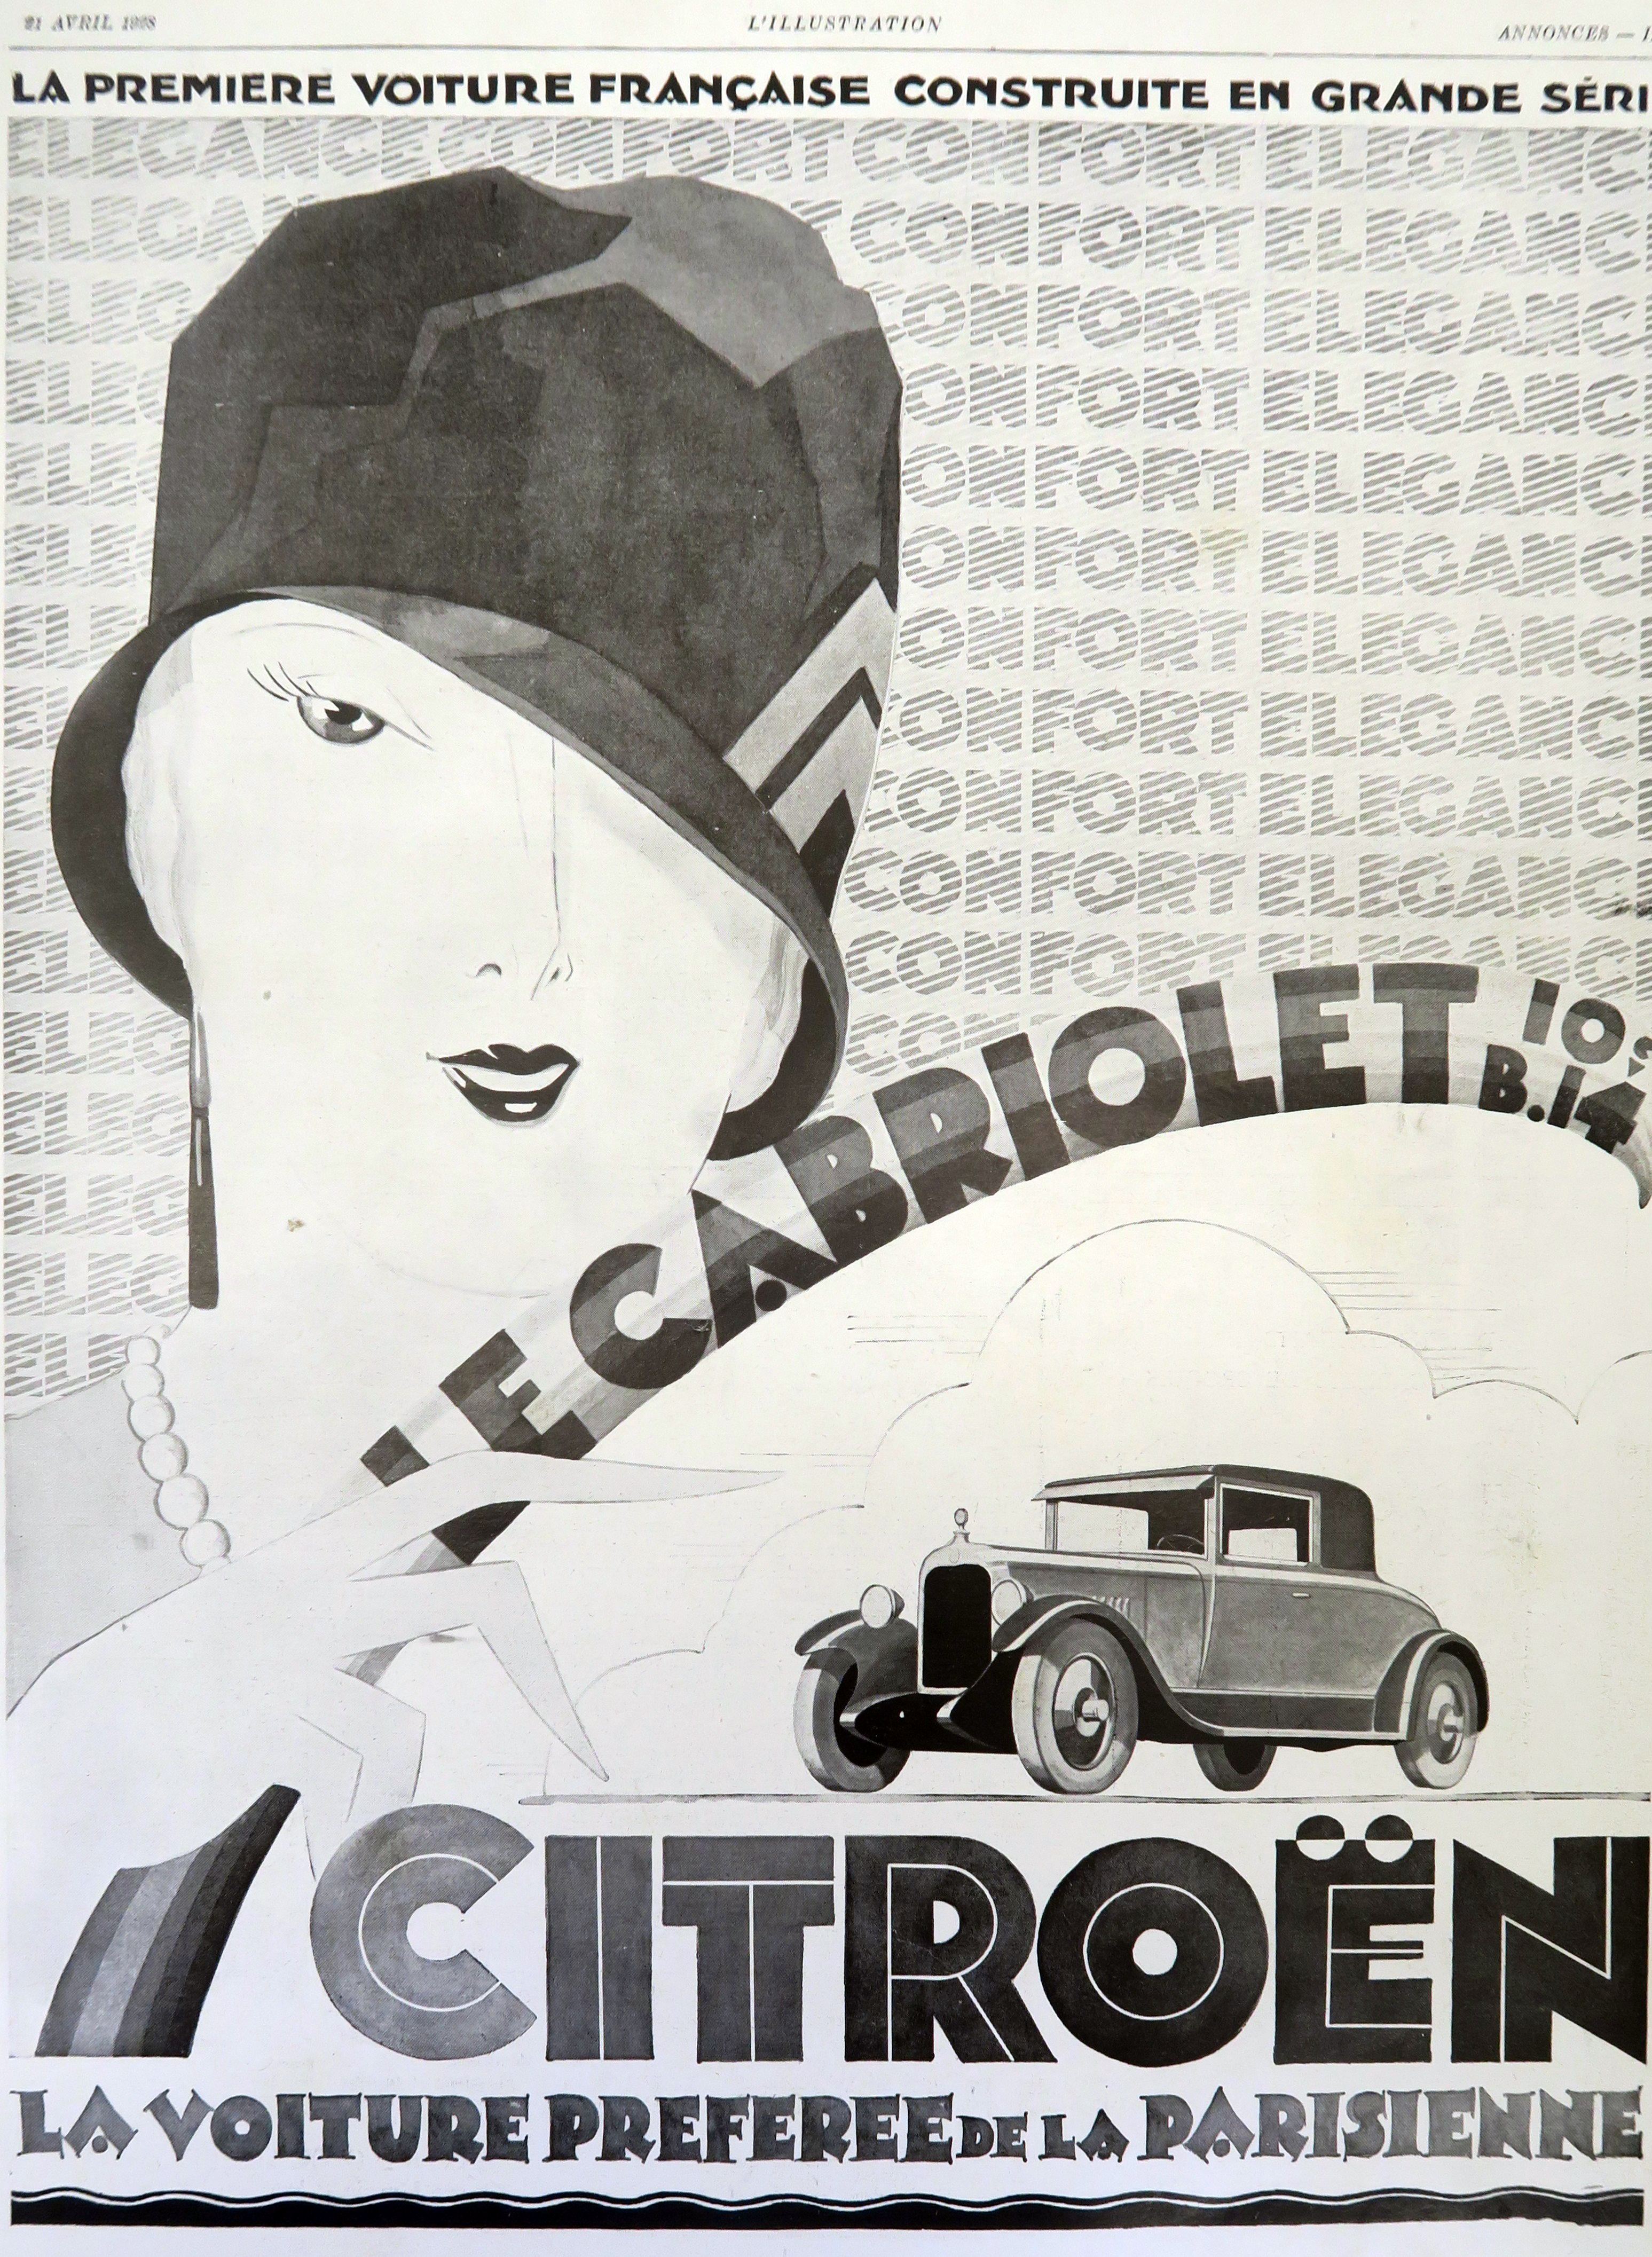 Ten brilliant Citroën car adverts from its first 100 years Citroën: The favourite car of the Parisian woman magazine advert